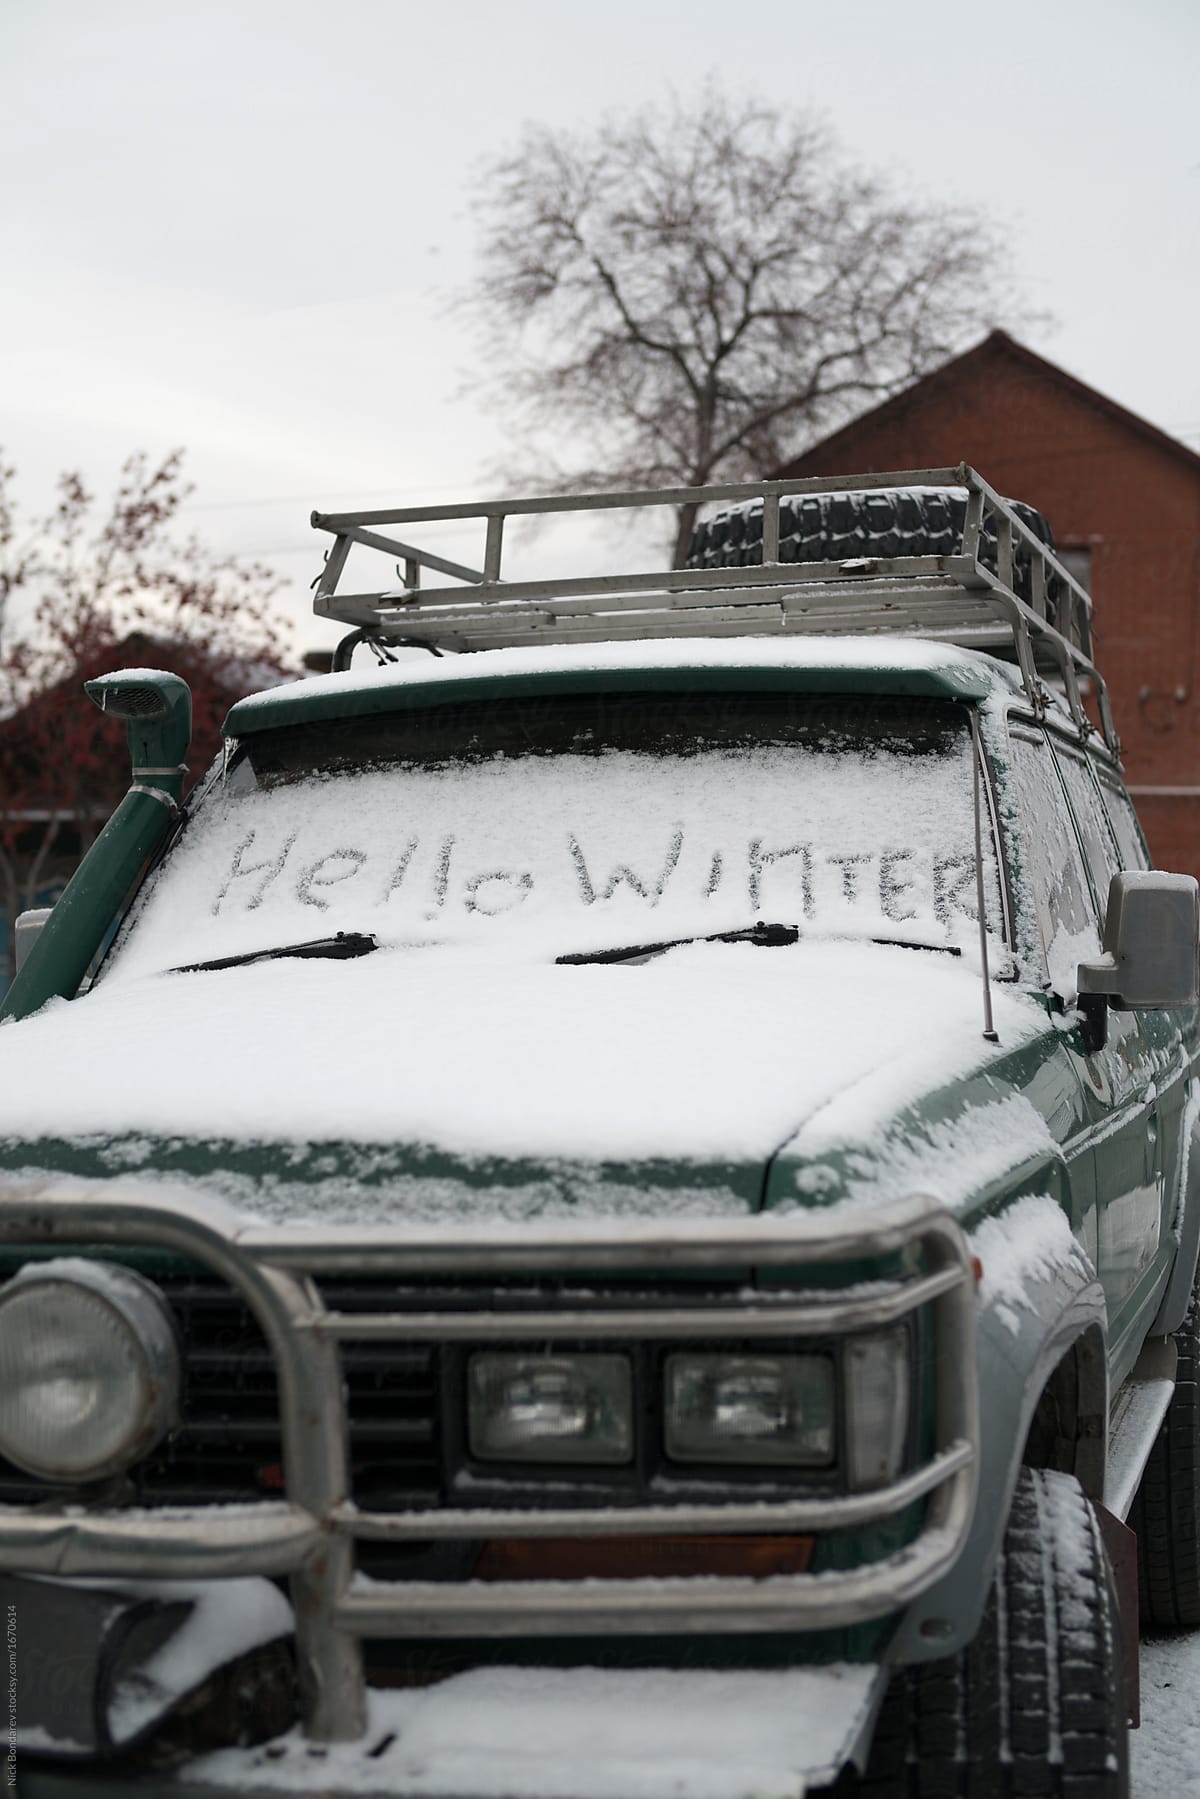 words hello winter on the snowy car in the first day of winter